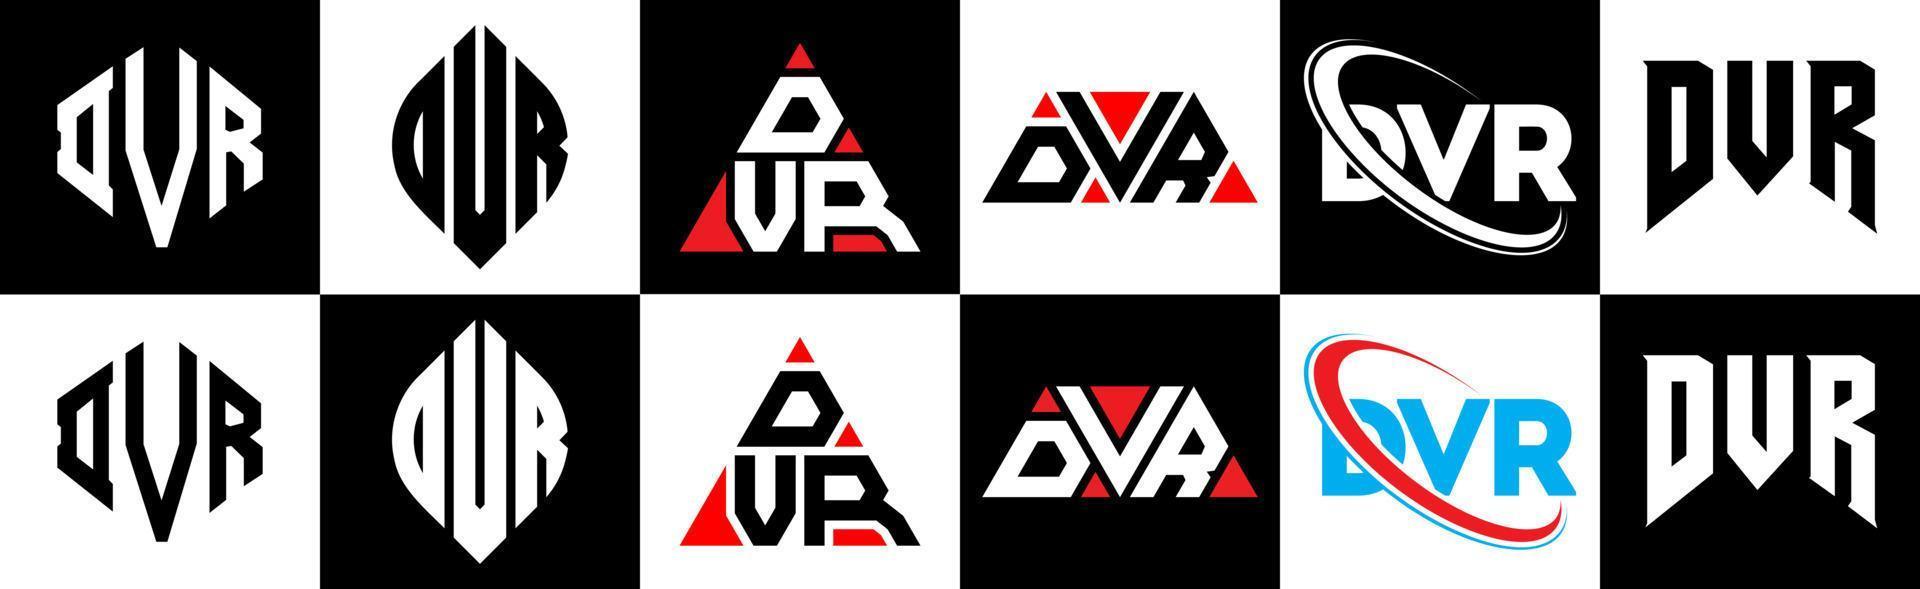 DVR letter logo design in six style. DVR polygon, circle, triangle, hexagon, flat and simple style with black and white color variation letter logo set in one artboard. DVR minimalist and classic logo vector